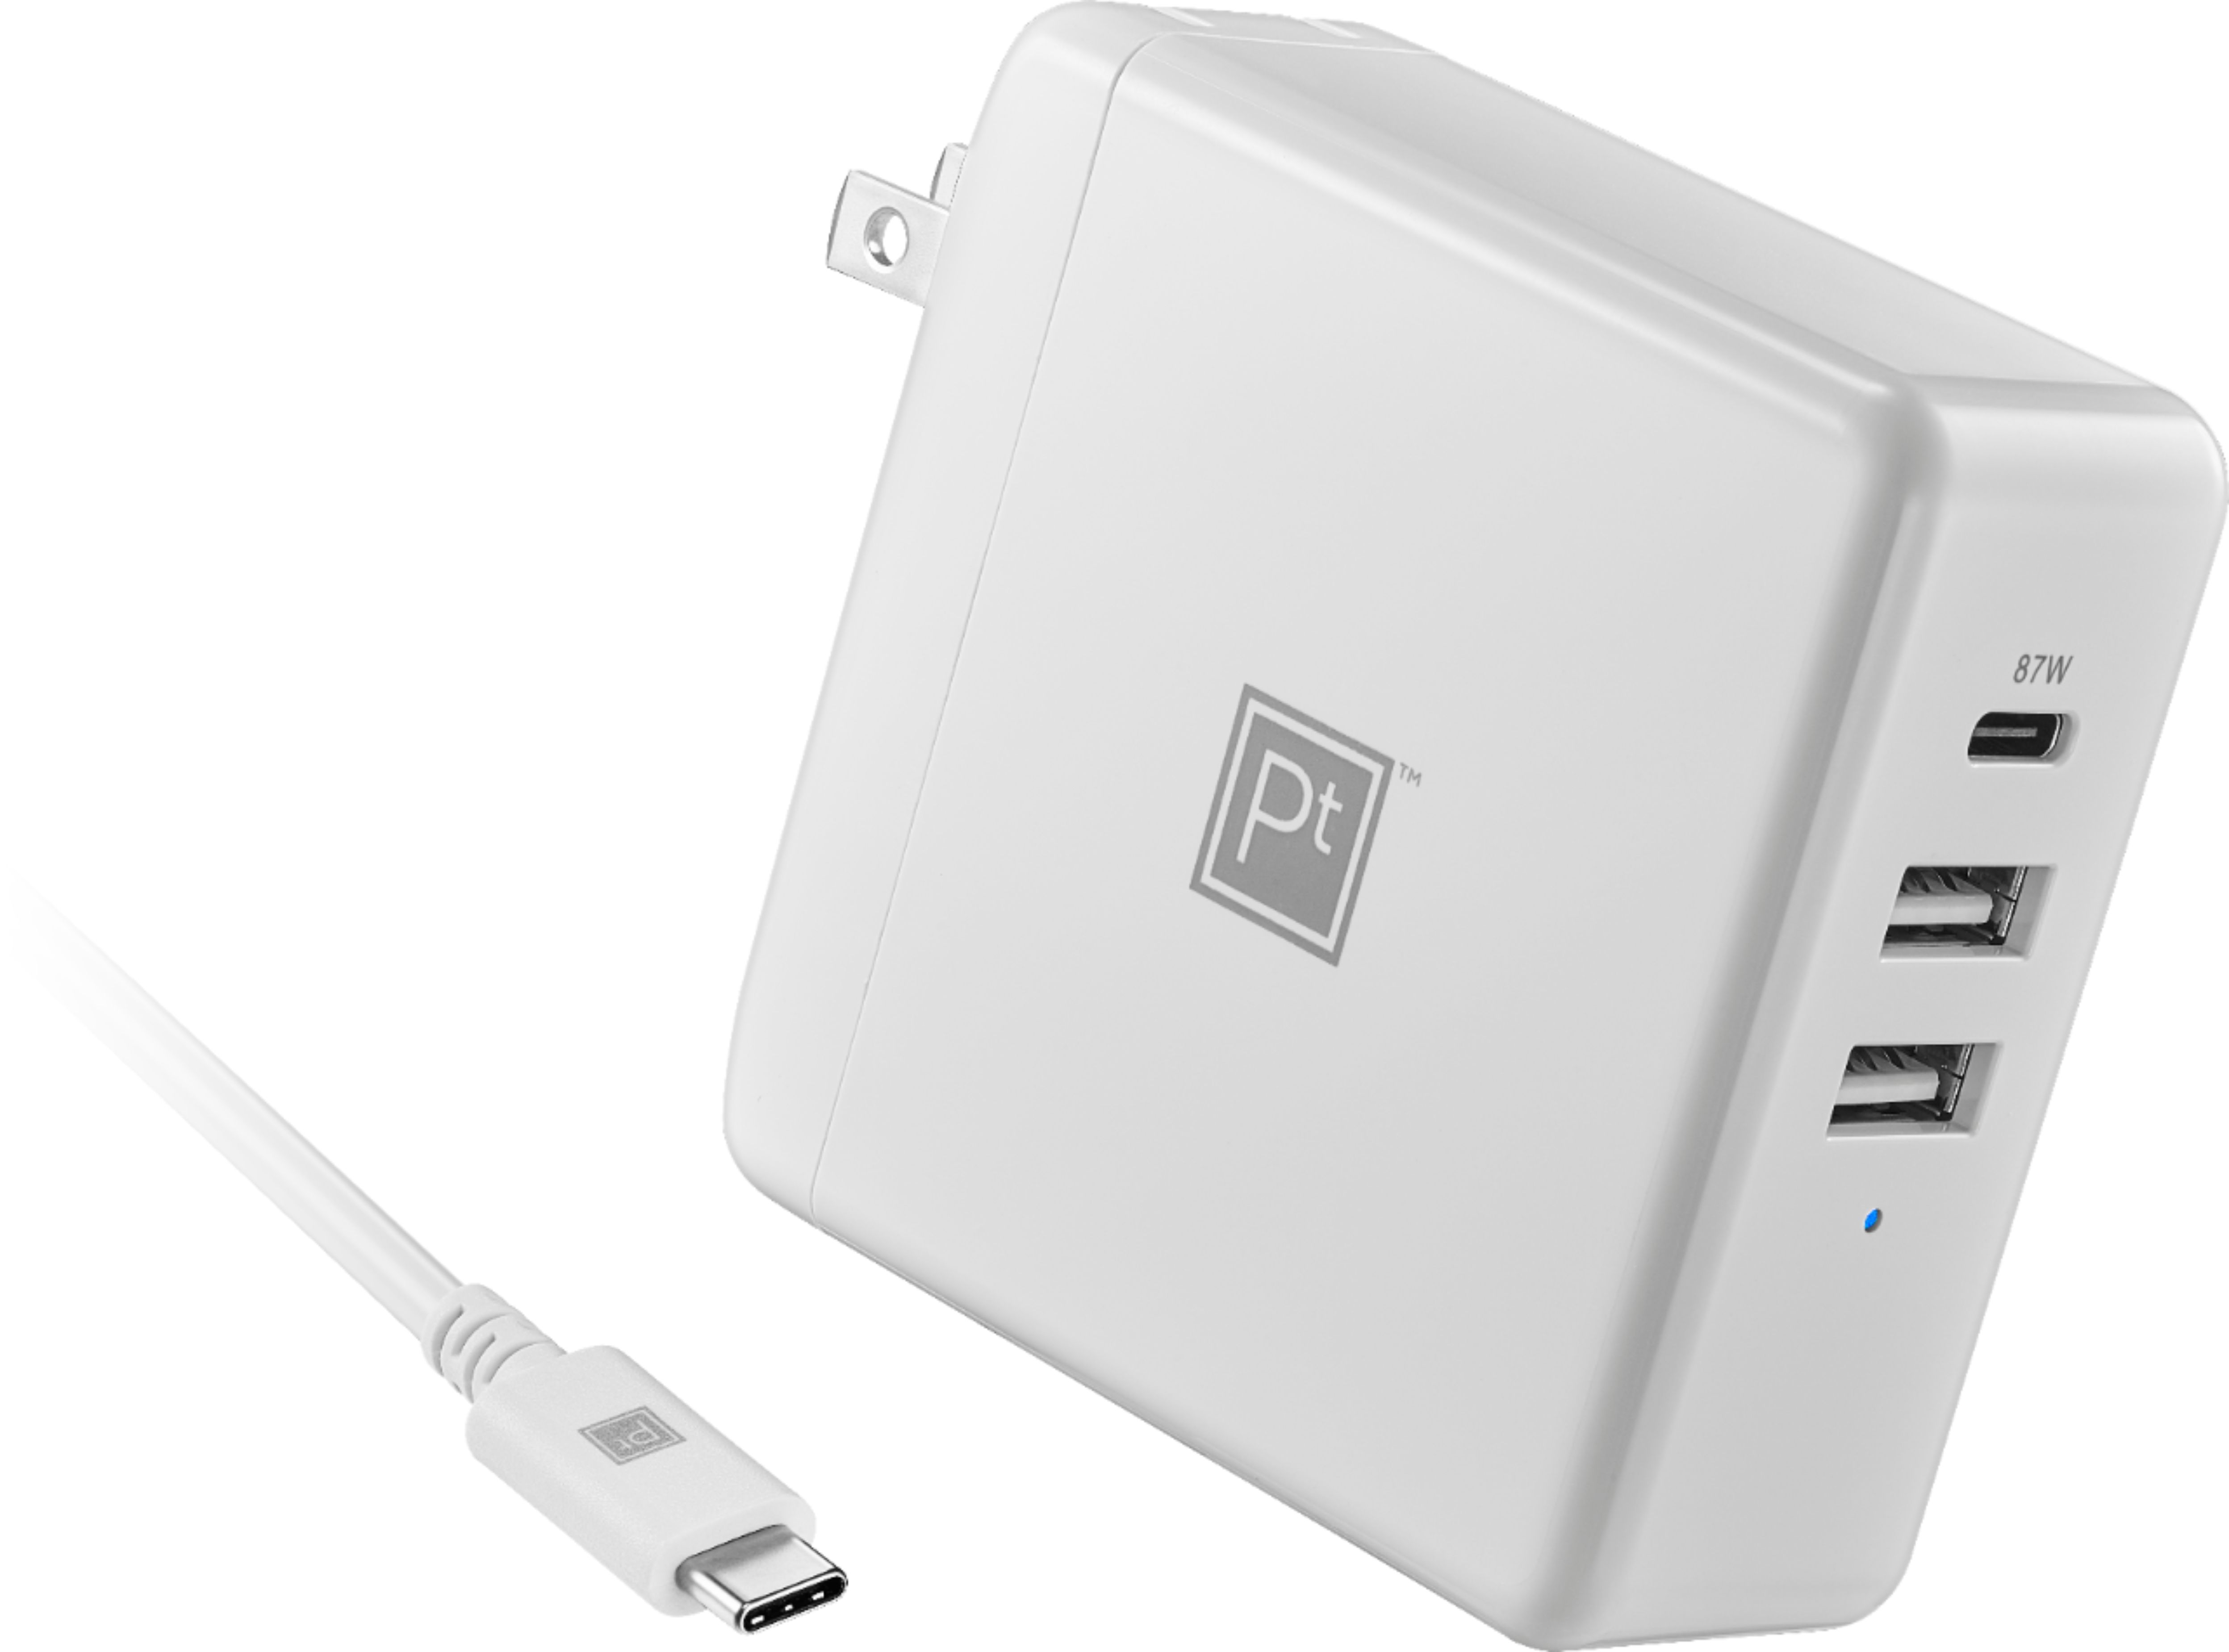 Platinum 95w 8 Usb C 3 Port Wall Charger With 87w Usb C Power Delivery For Macbook Ipad Iphone Chromebook Or Usb C Laptops White Pt Pac90c2u Best Buy